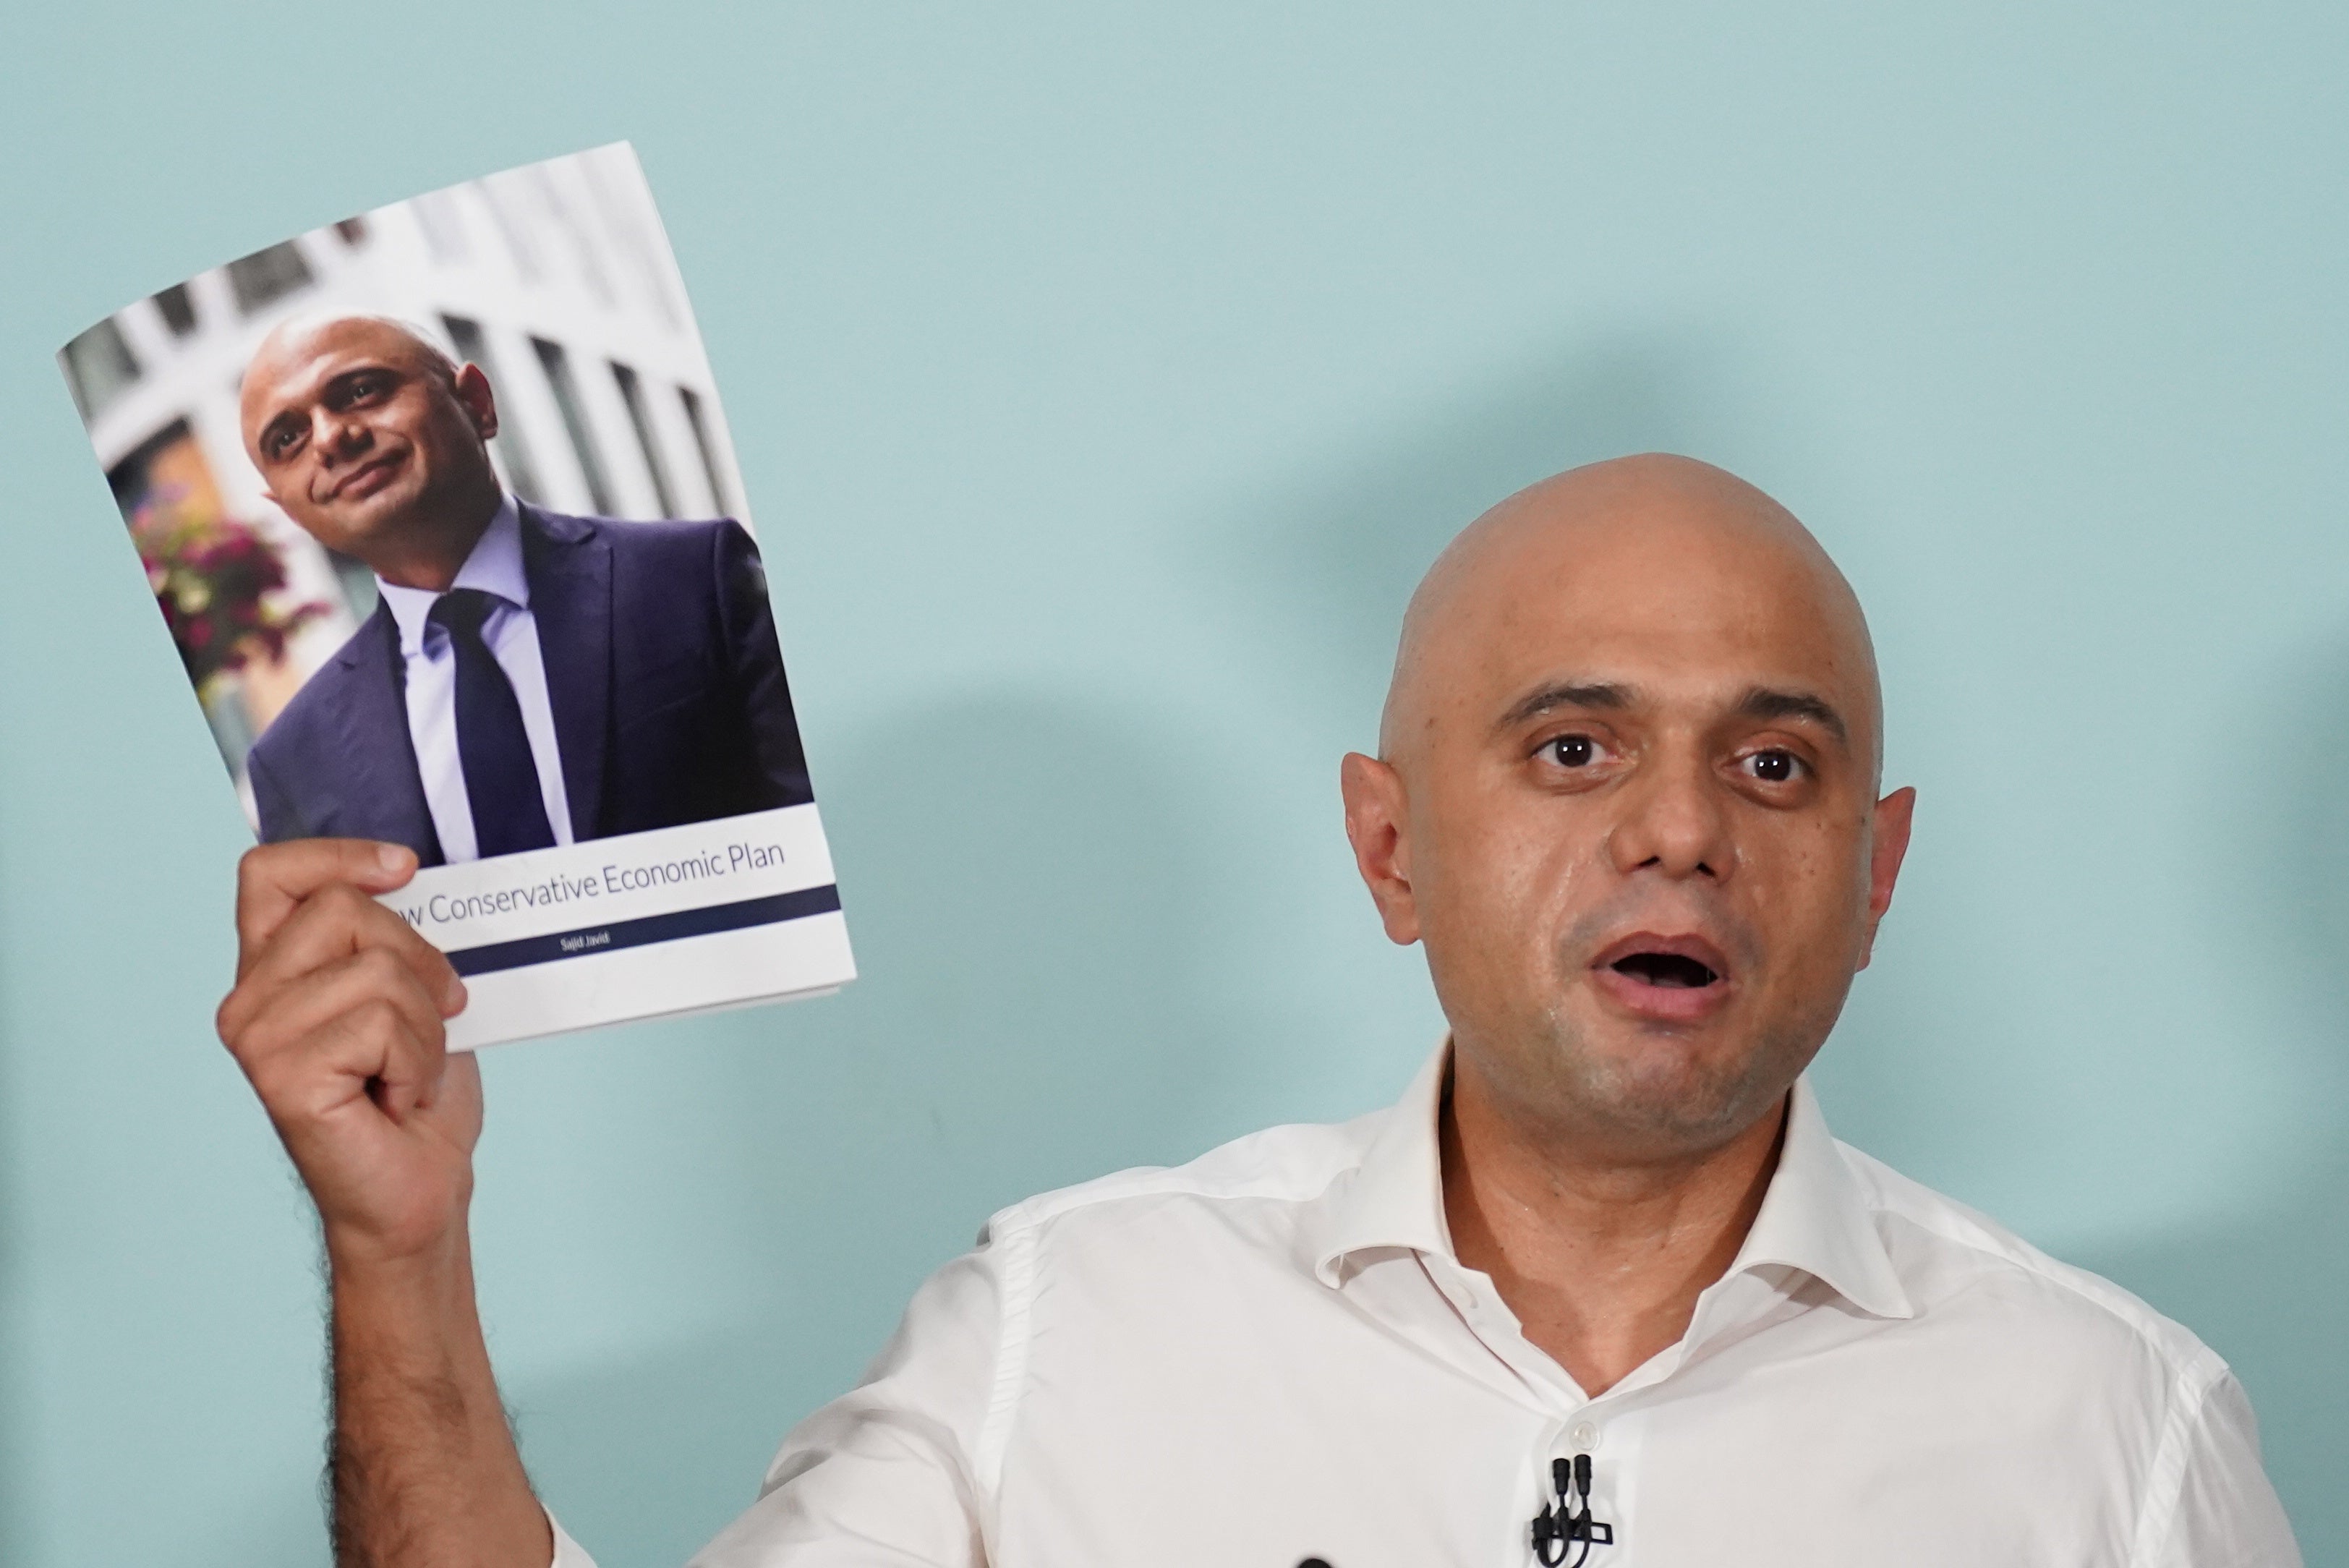 The NHS has been starved by a decade of Tory austerity, some of which was on Javid’s watch